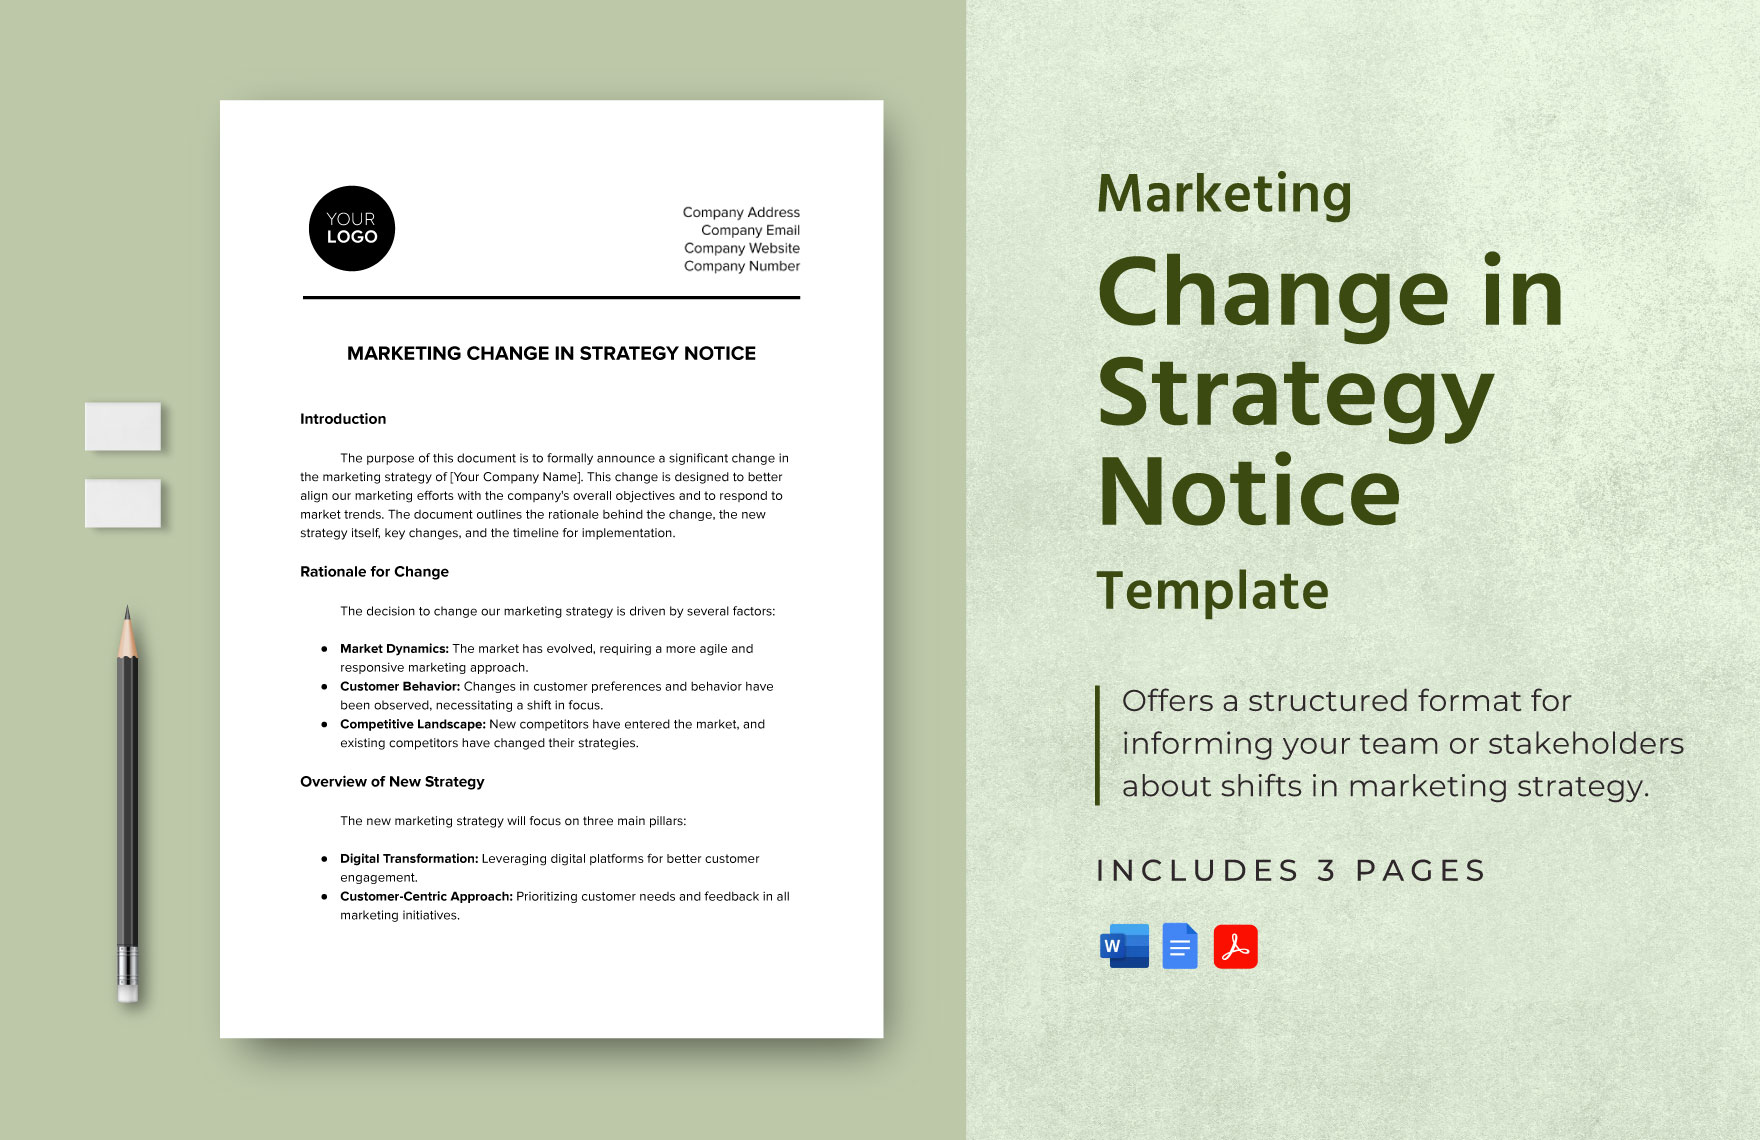 Marketing Change in Strategy Notice Template in Word, Google Docs, PDF